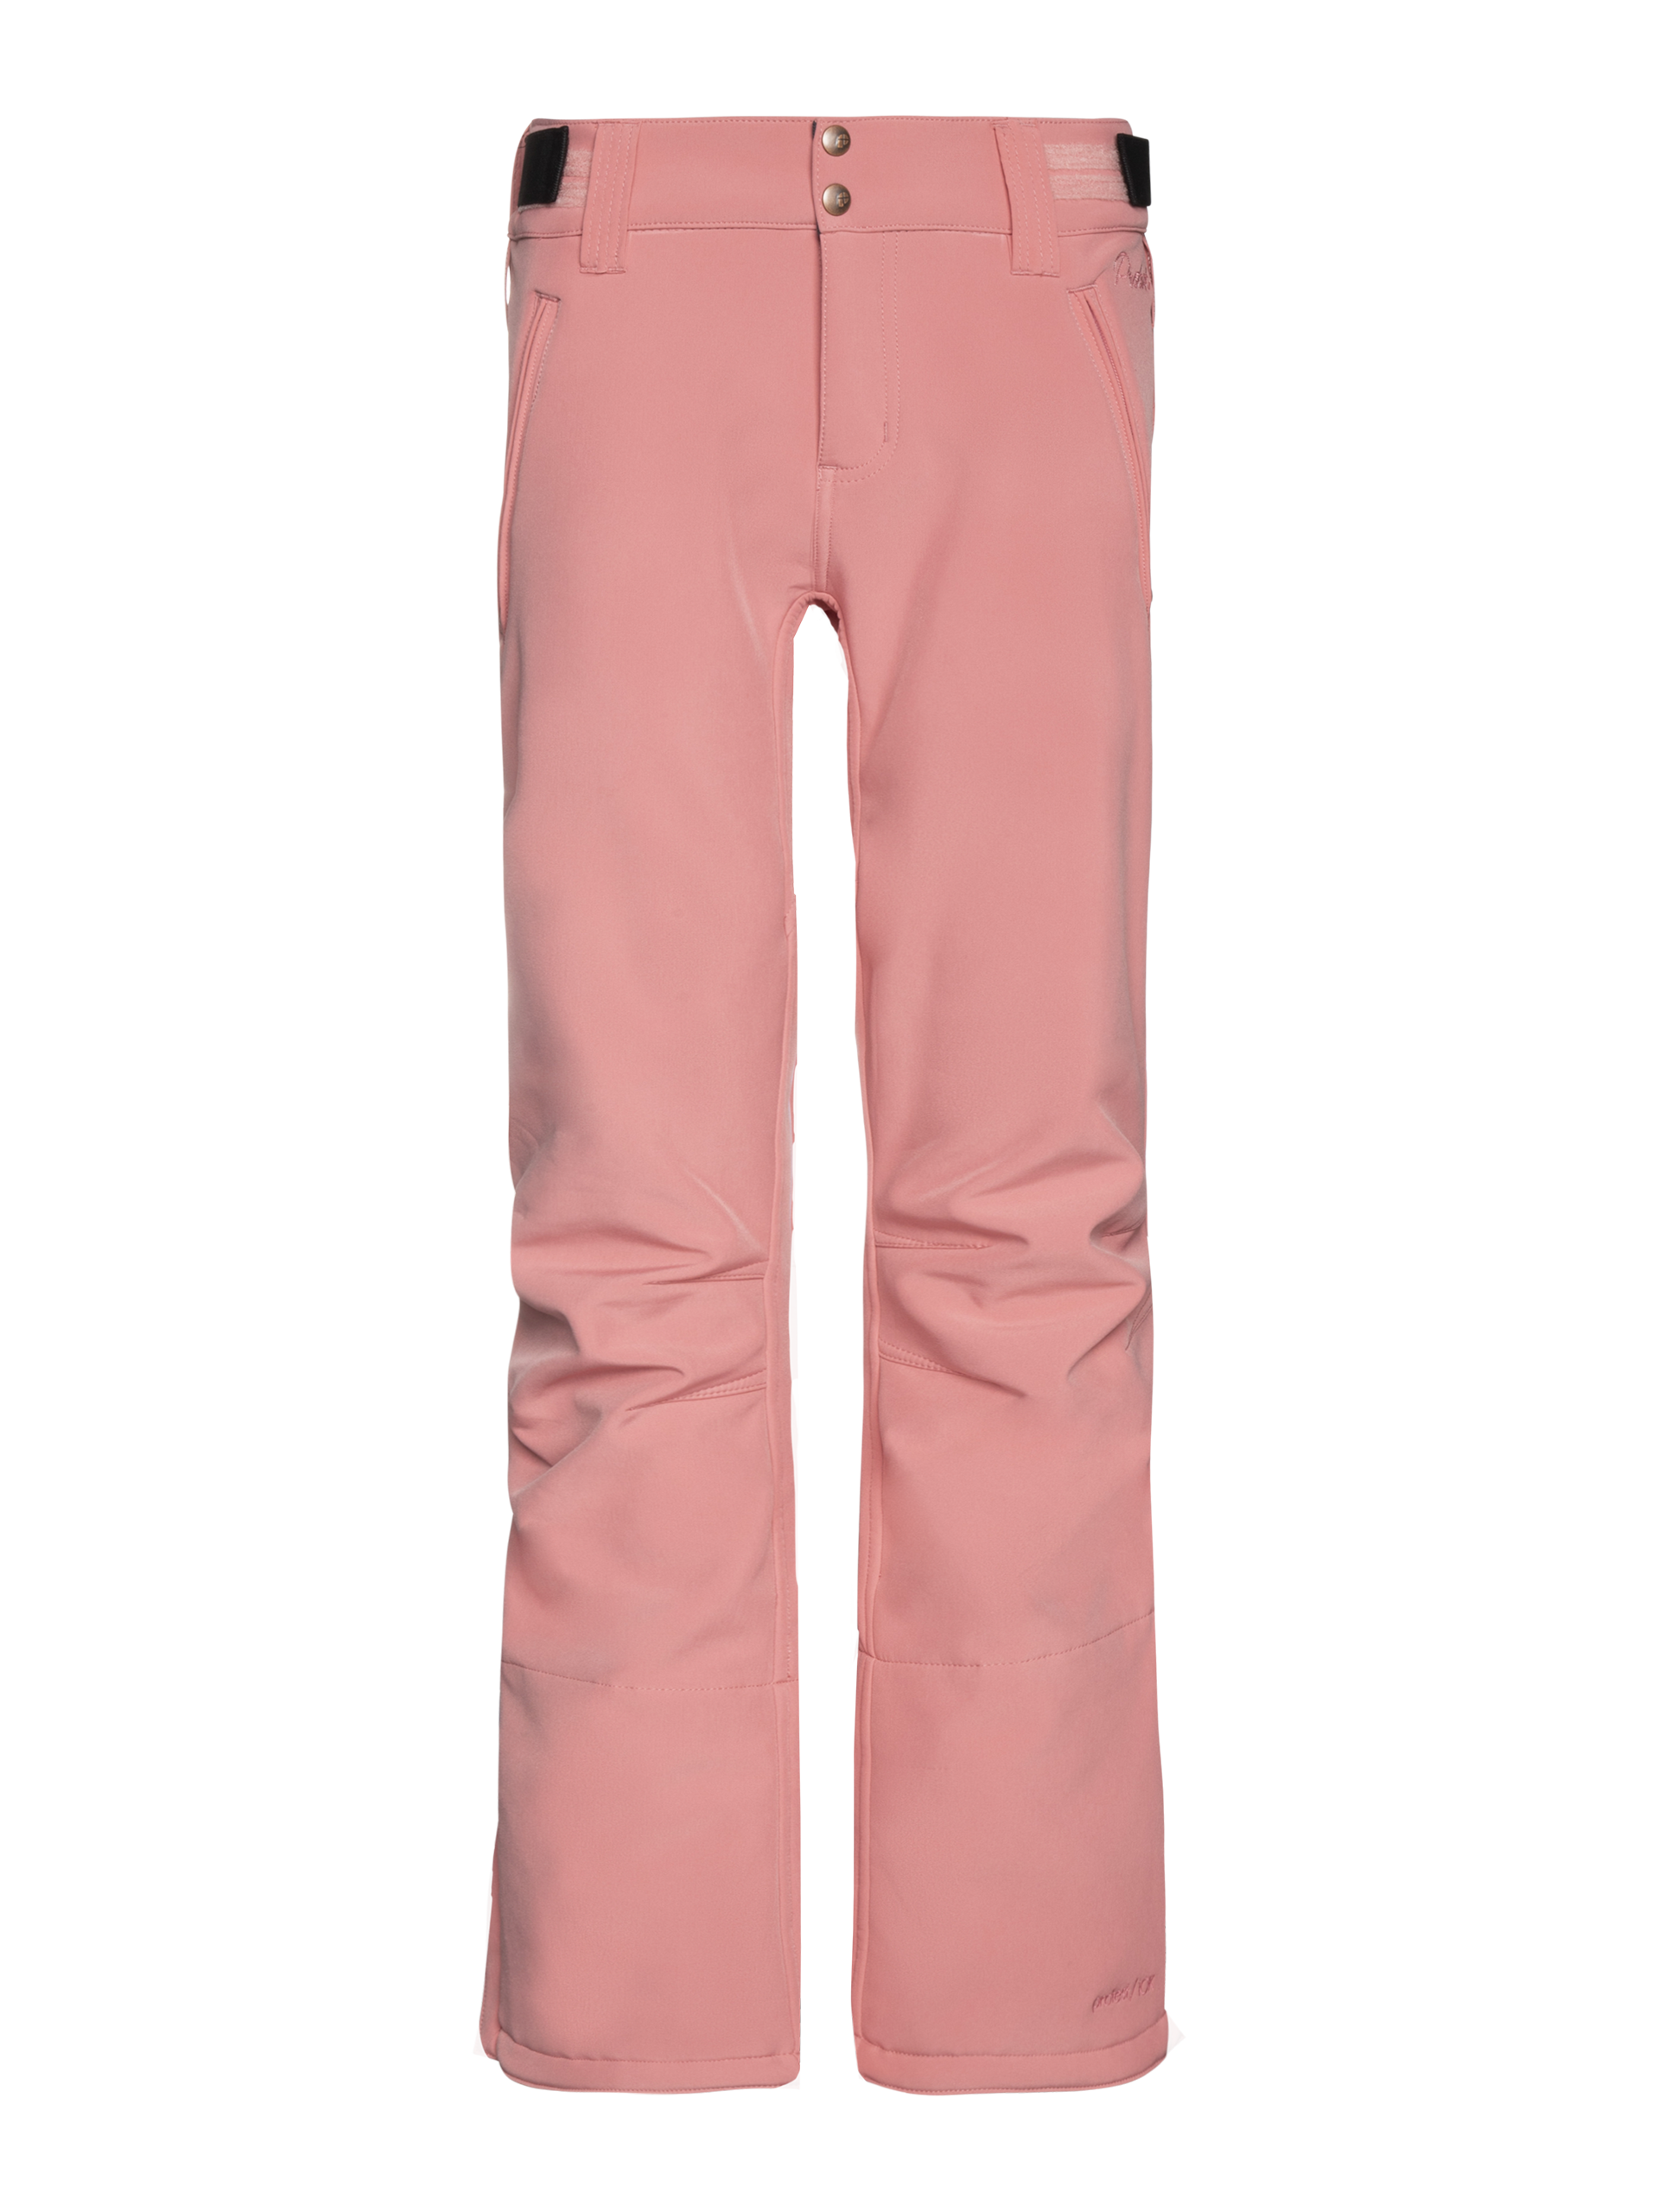 PROTEST-LOLE JR SOFTSHELL SNOWPANTS CAMEO PINK - Ski trousers